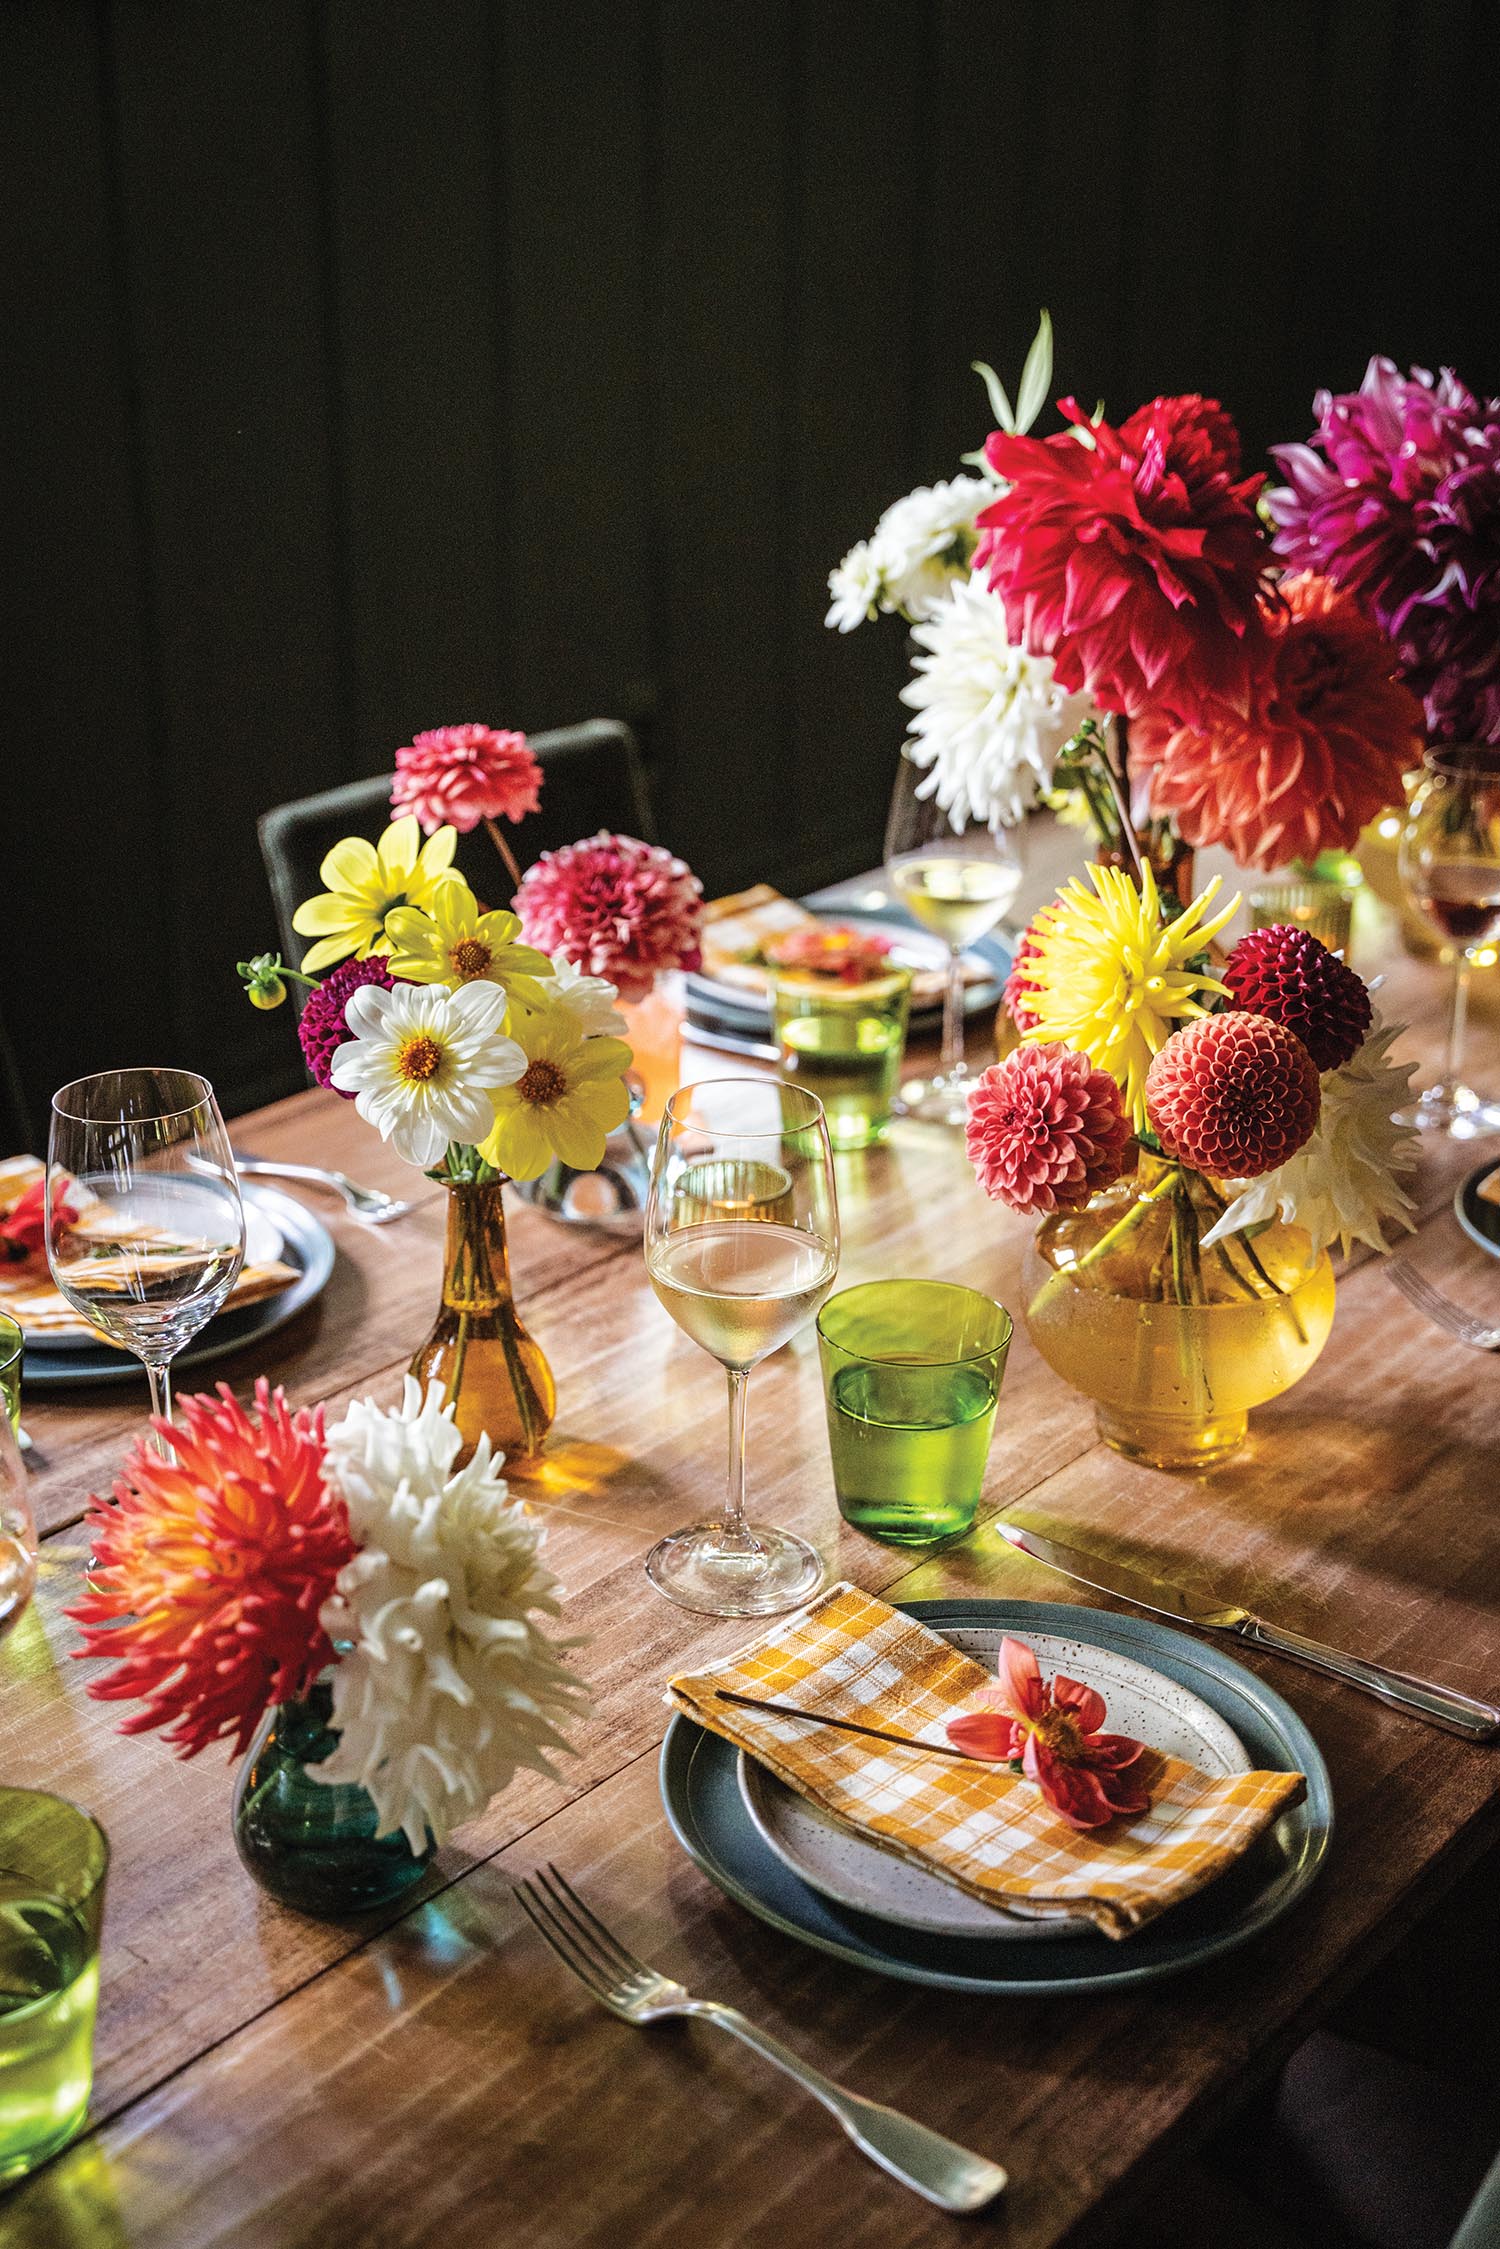 A table is set with rustic dinnerware and colorful dahlias.